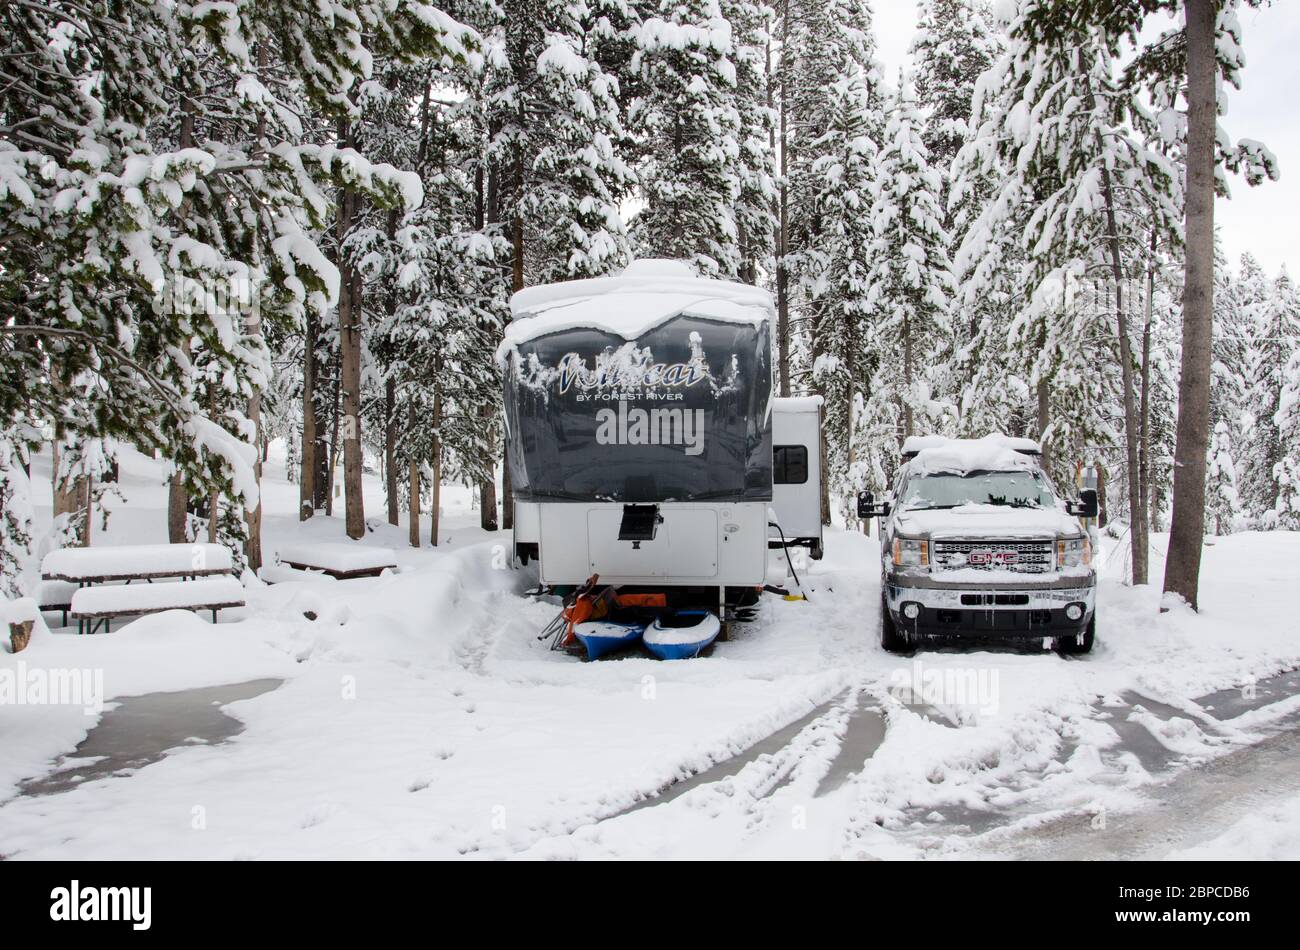 A mid May snowfall covers an RV and truck in Yellowstone National Park, USA Stock Photo